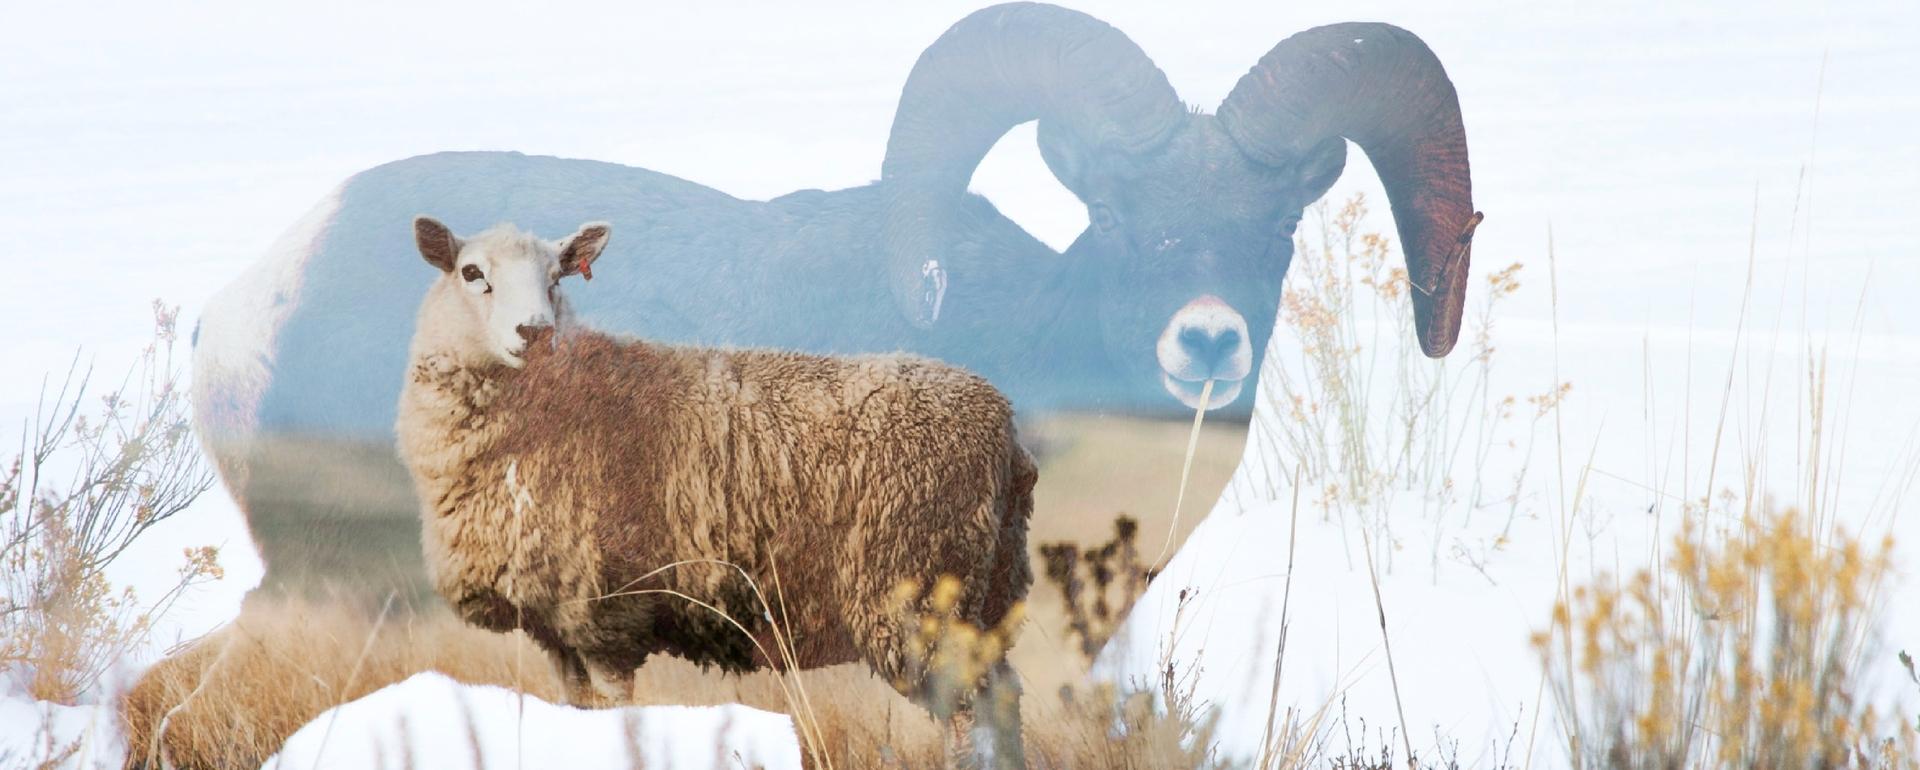 The bacteria M. ovi causes mild symptoms in domestic sheep, but can be fatal to bighorns